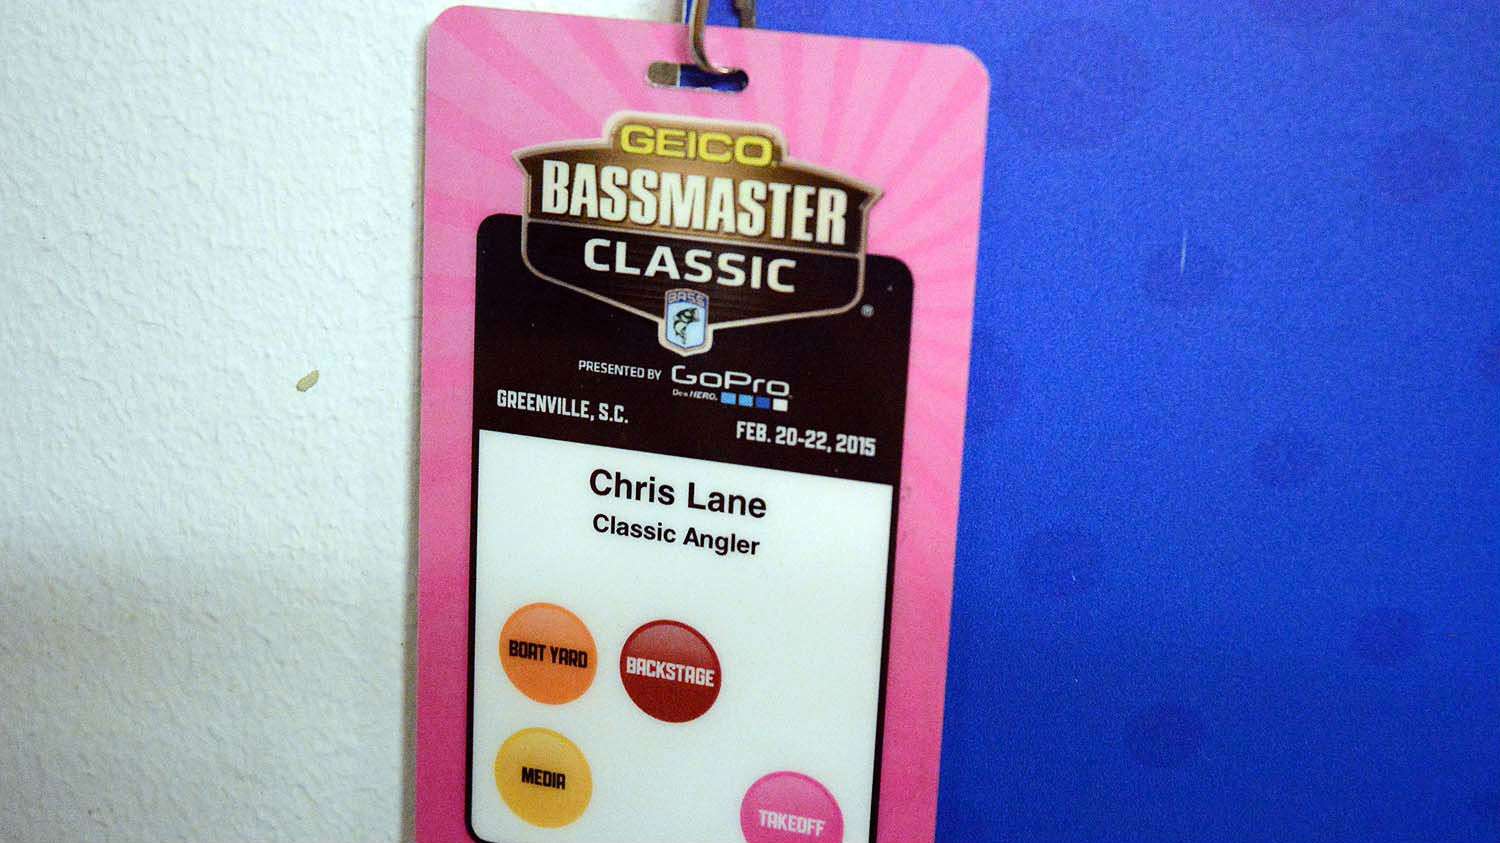 Classic anglers wear this laminated credential during the event. Each area is secure and requires special access according to the job. For Lane that means access to the Boat Yard, Backstage, Media Room and Takeoff areas. 